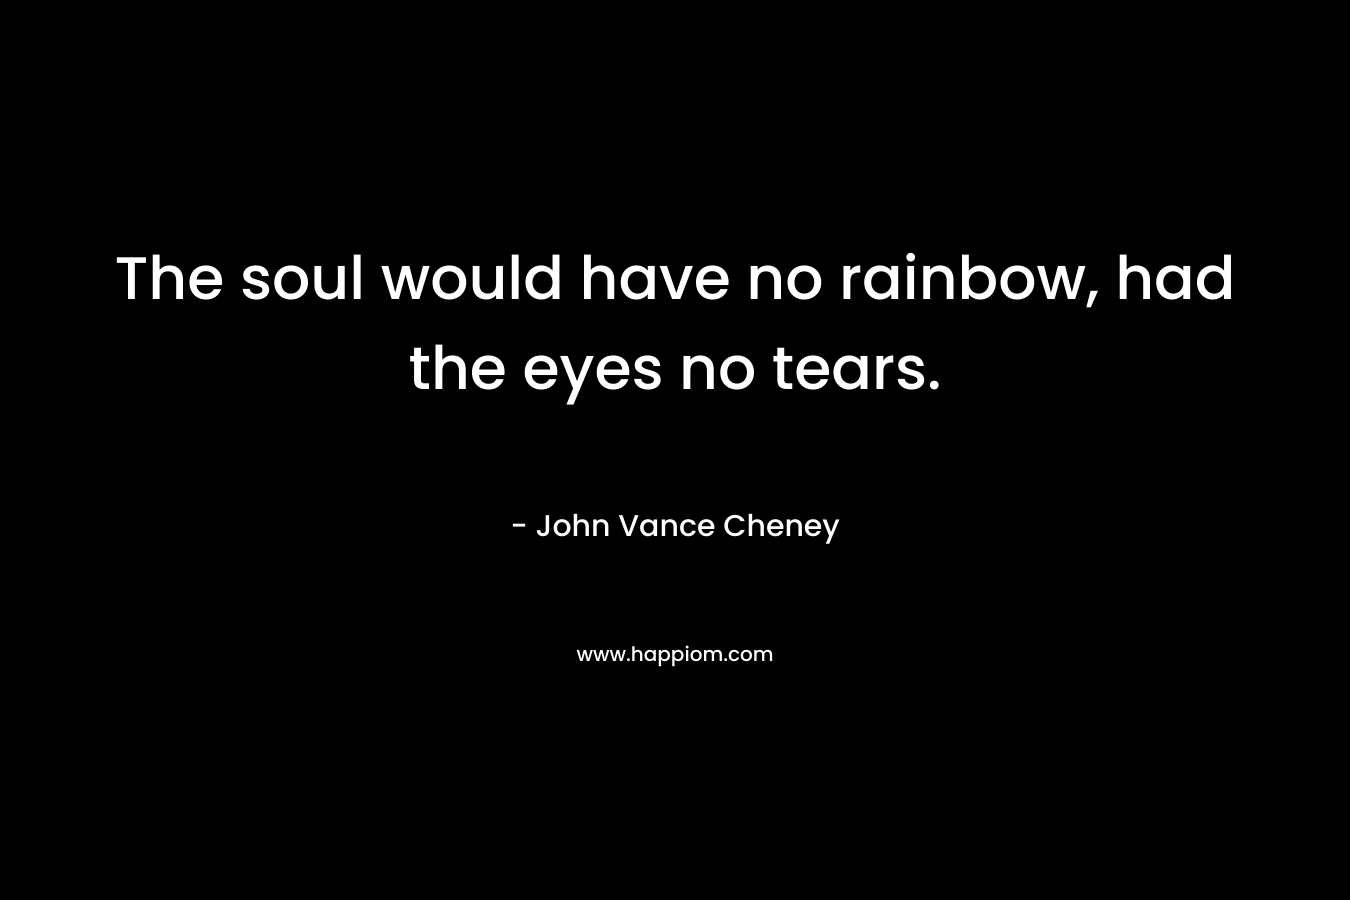 The soul would have no rainbow, had the eyes no tears.